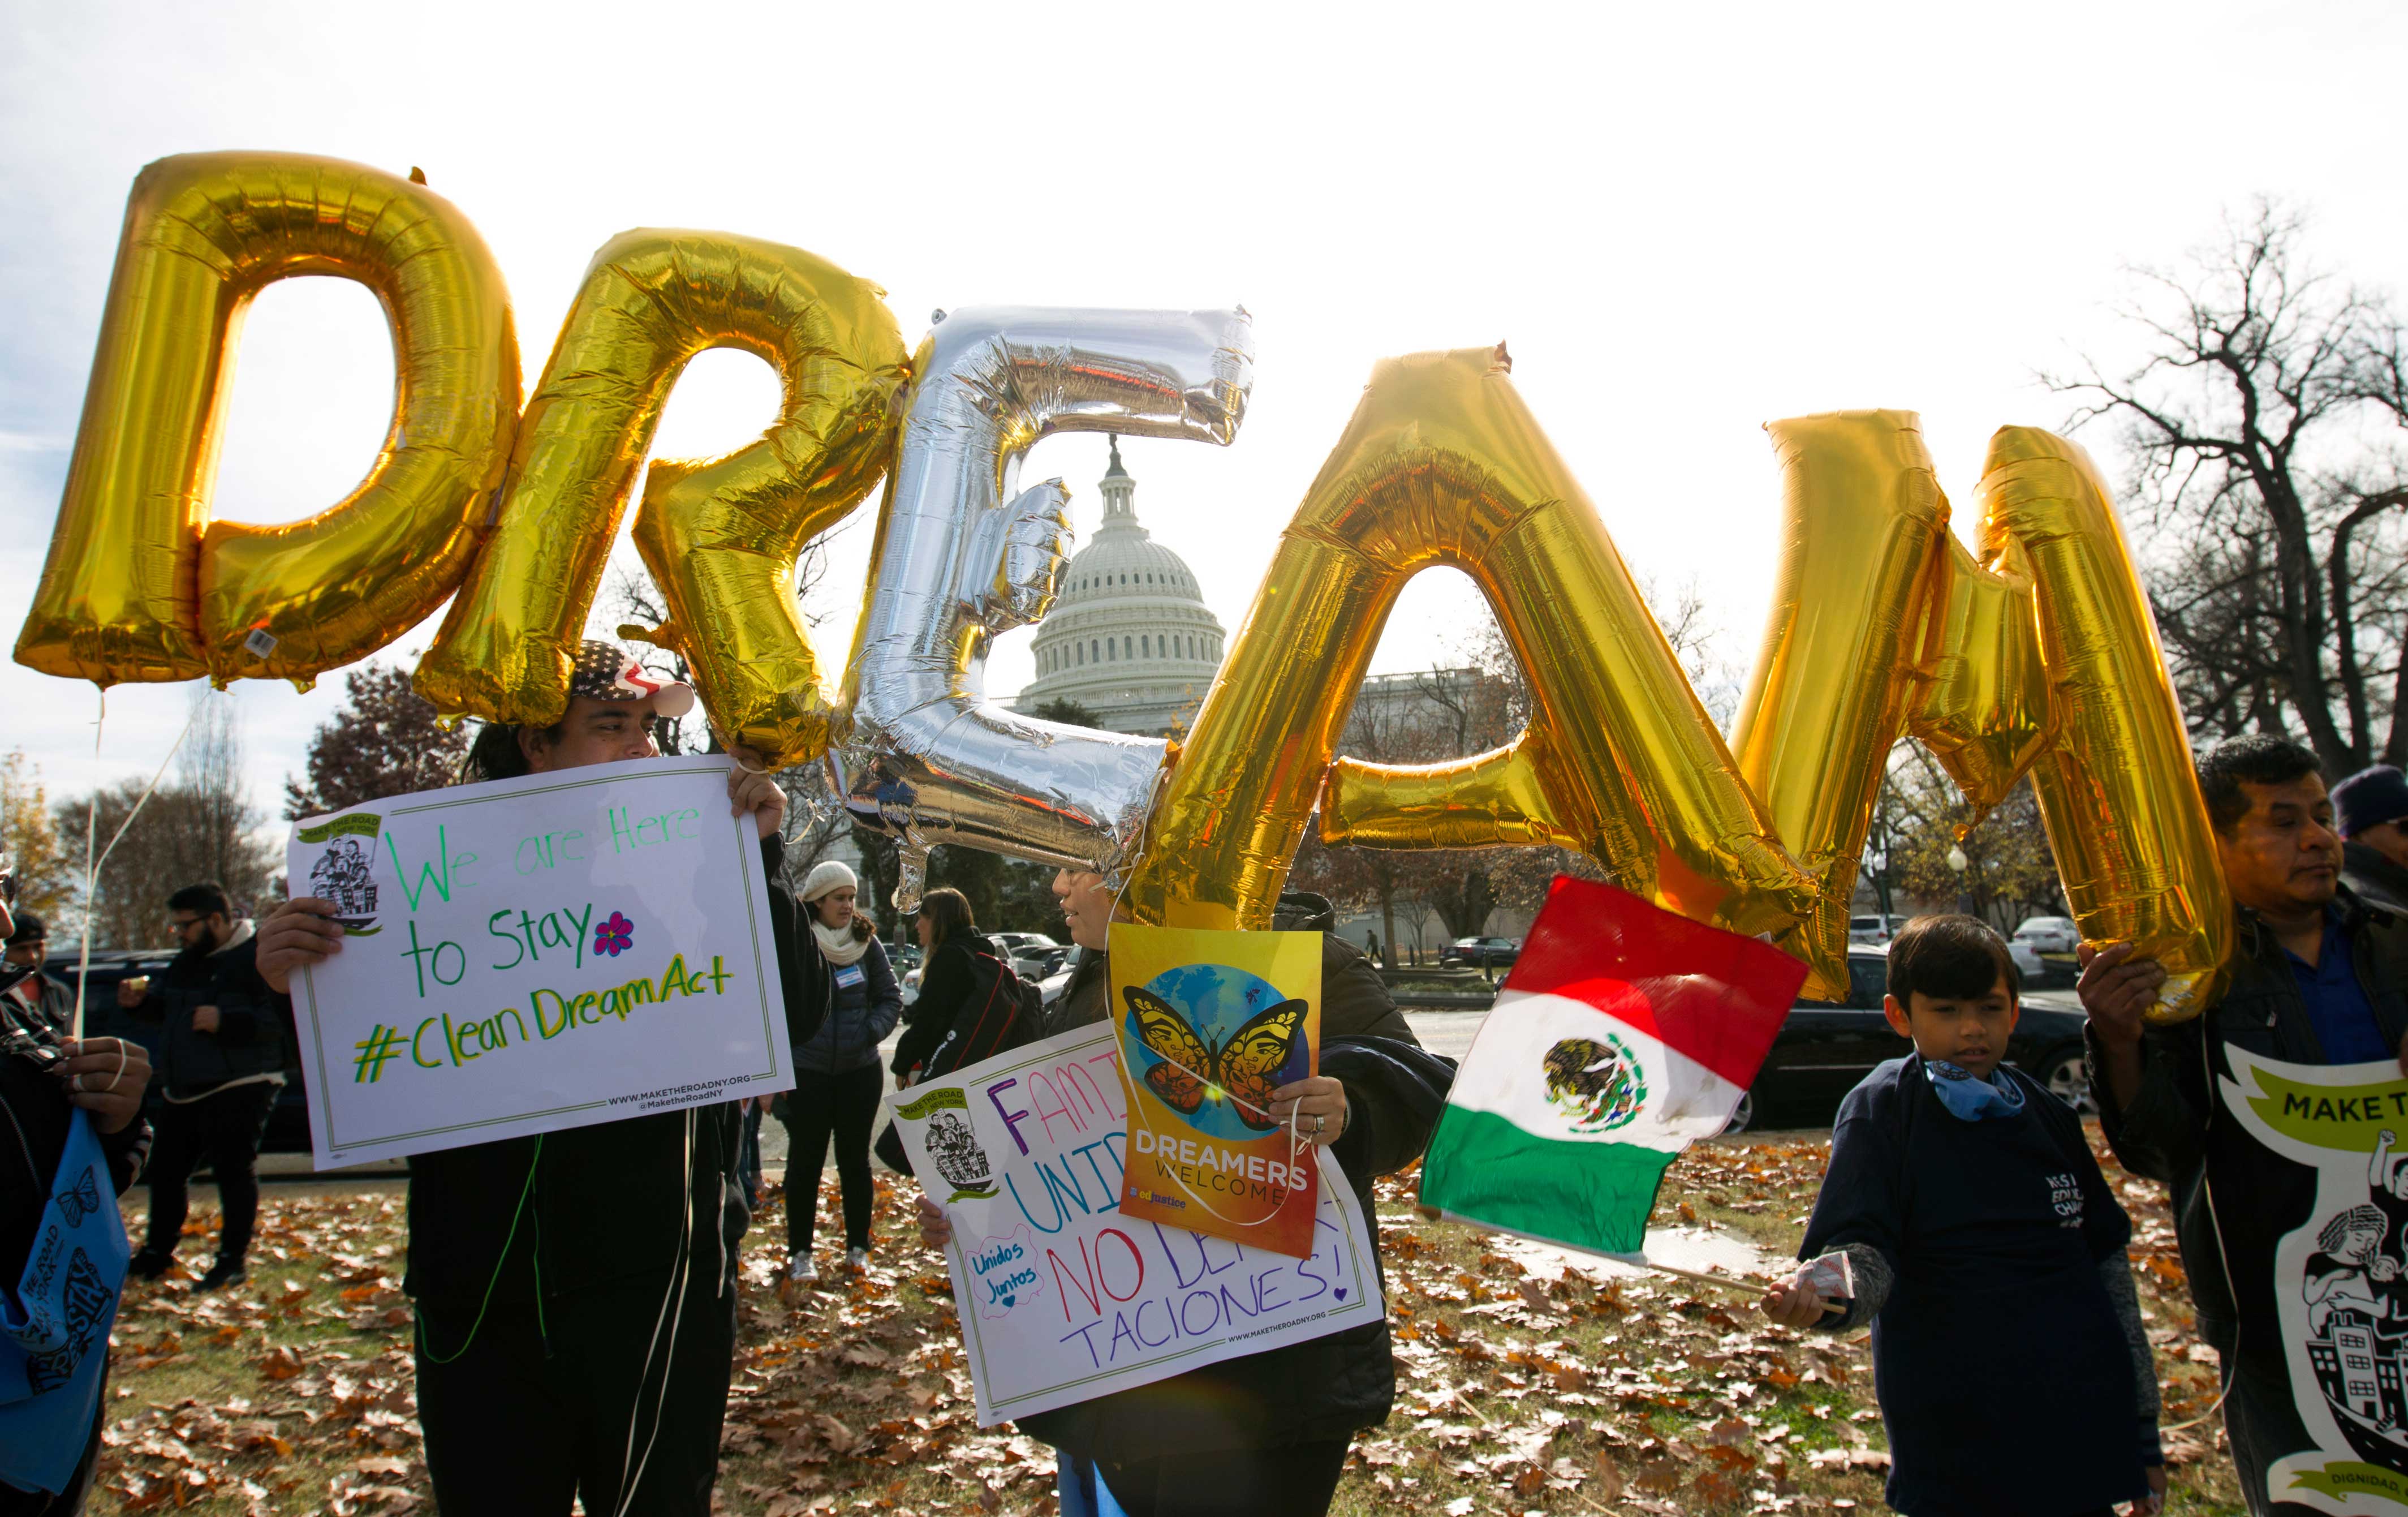 Supporters of the Dream Act protest in Washington, DC.